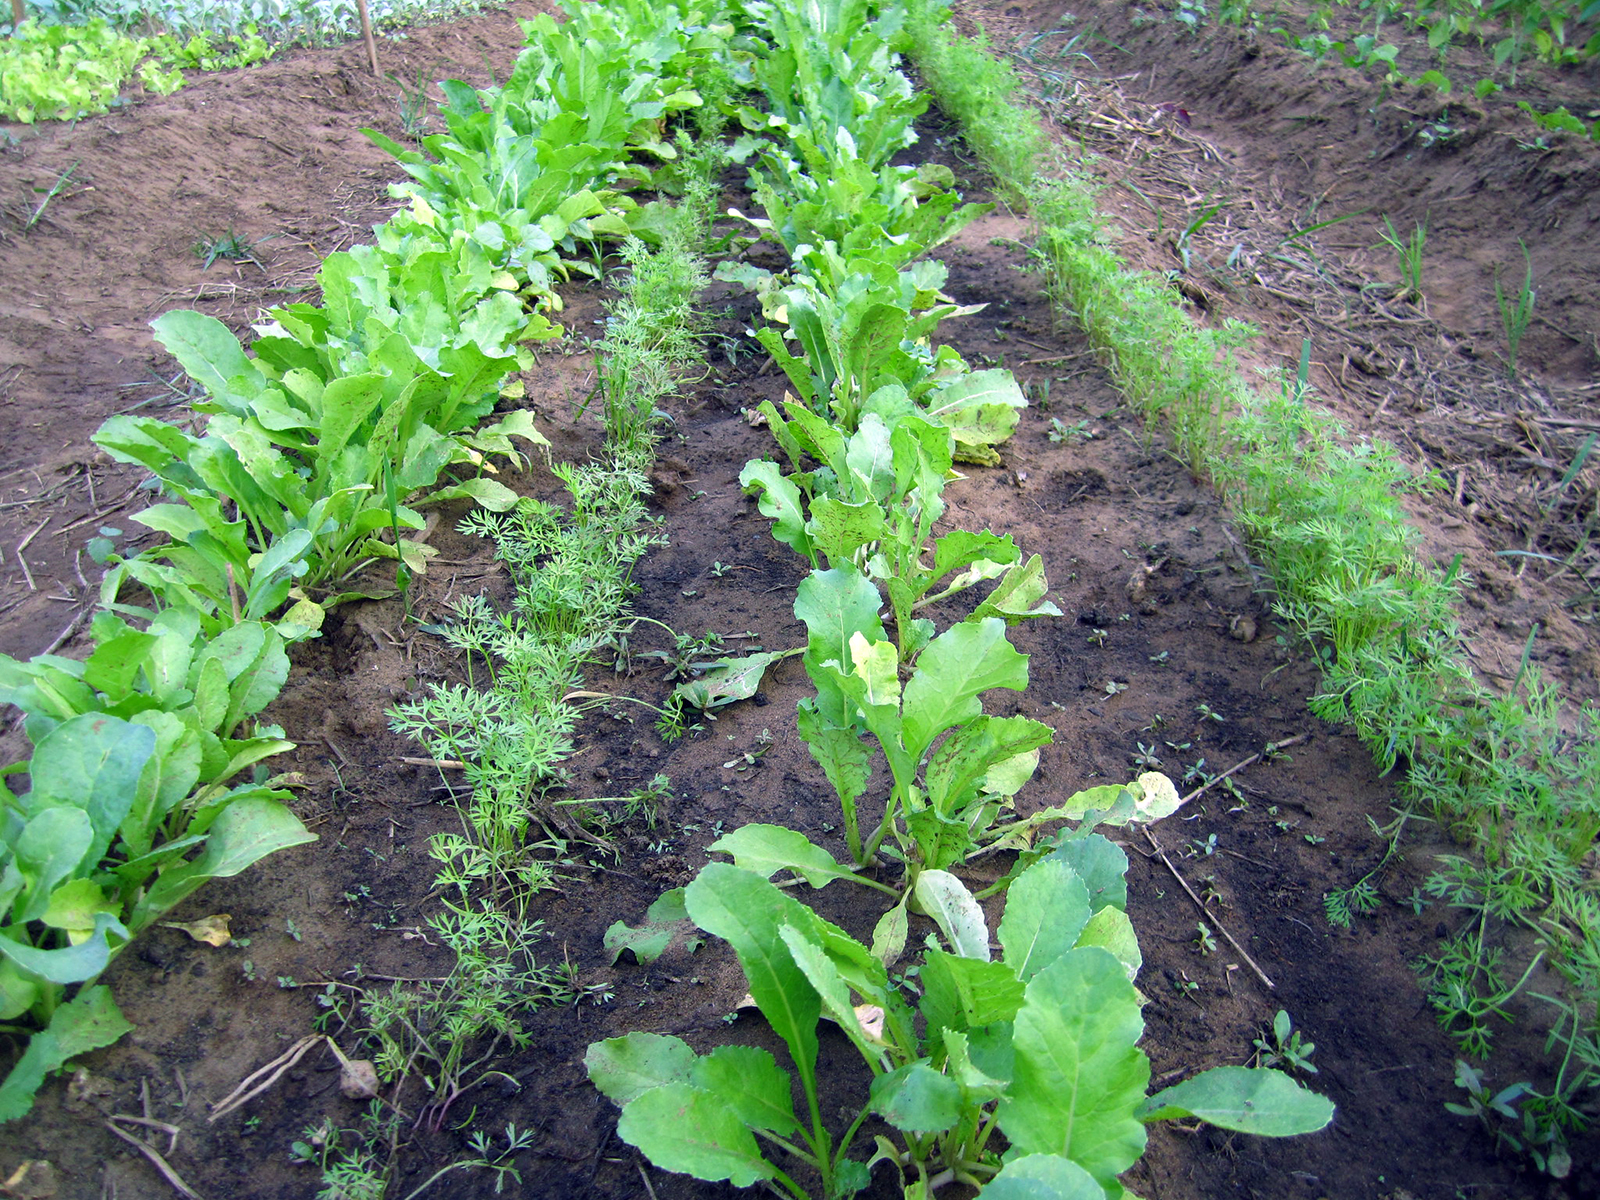 Image of Tomatoes and cabbage planted in alternating rows